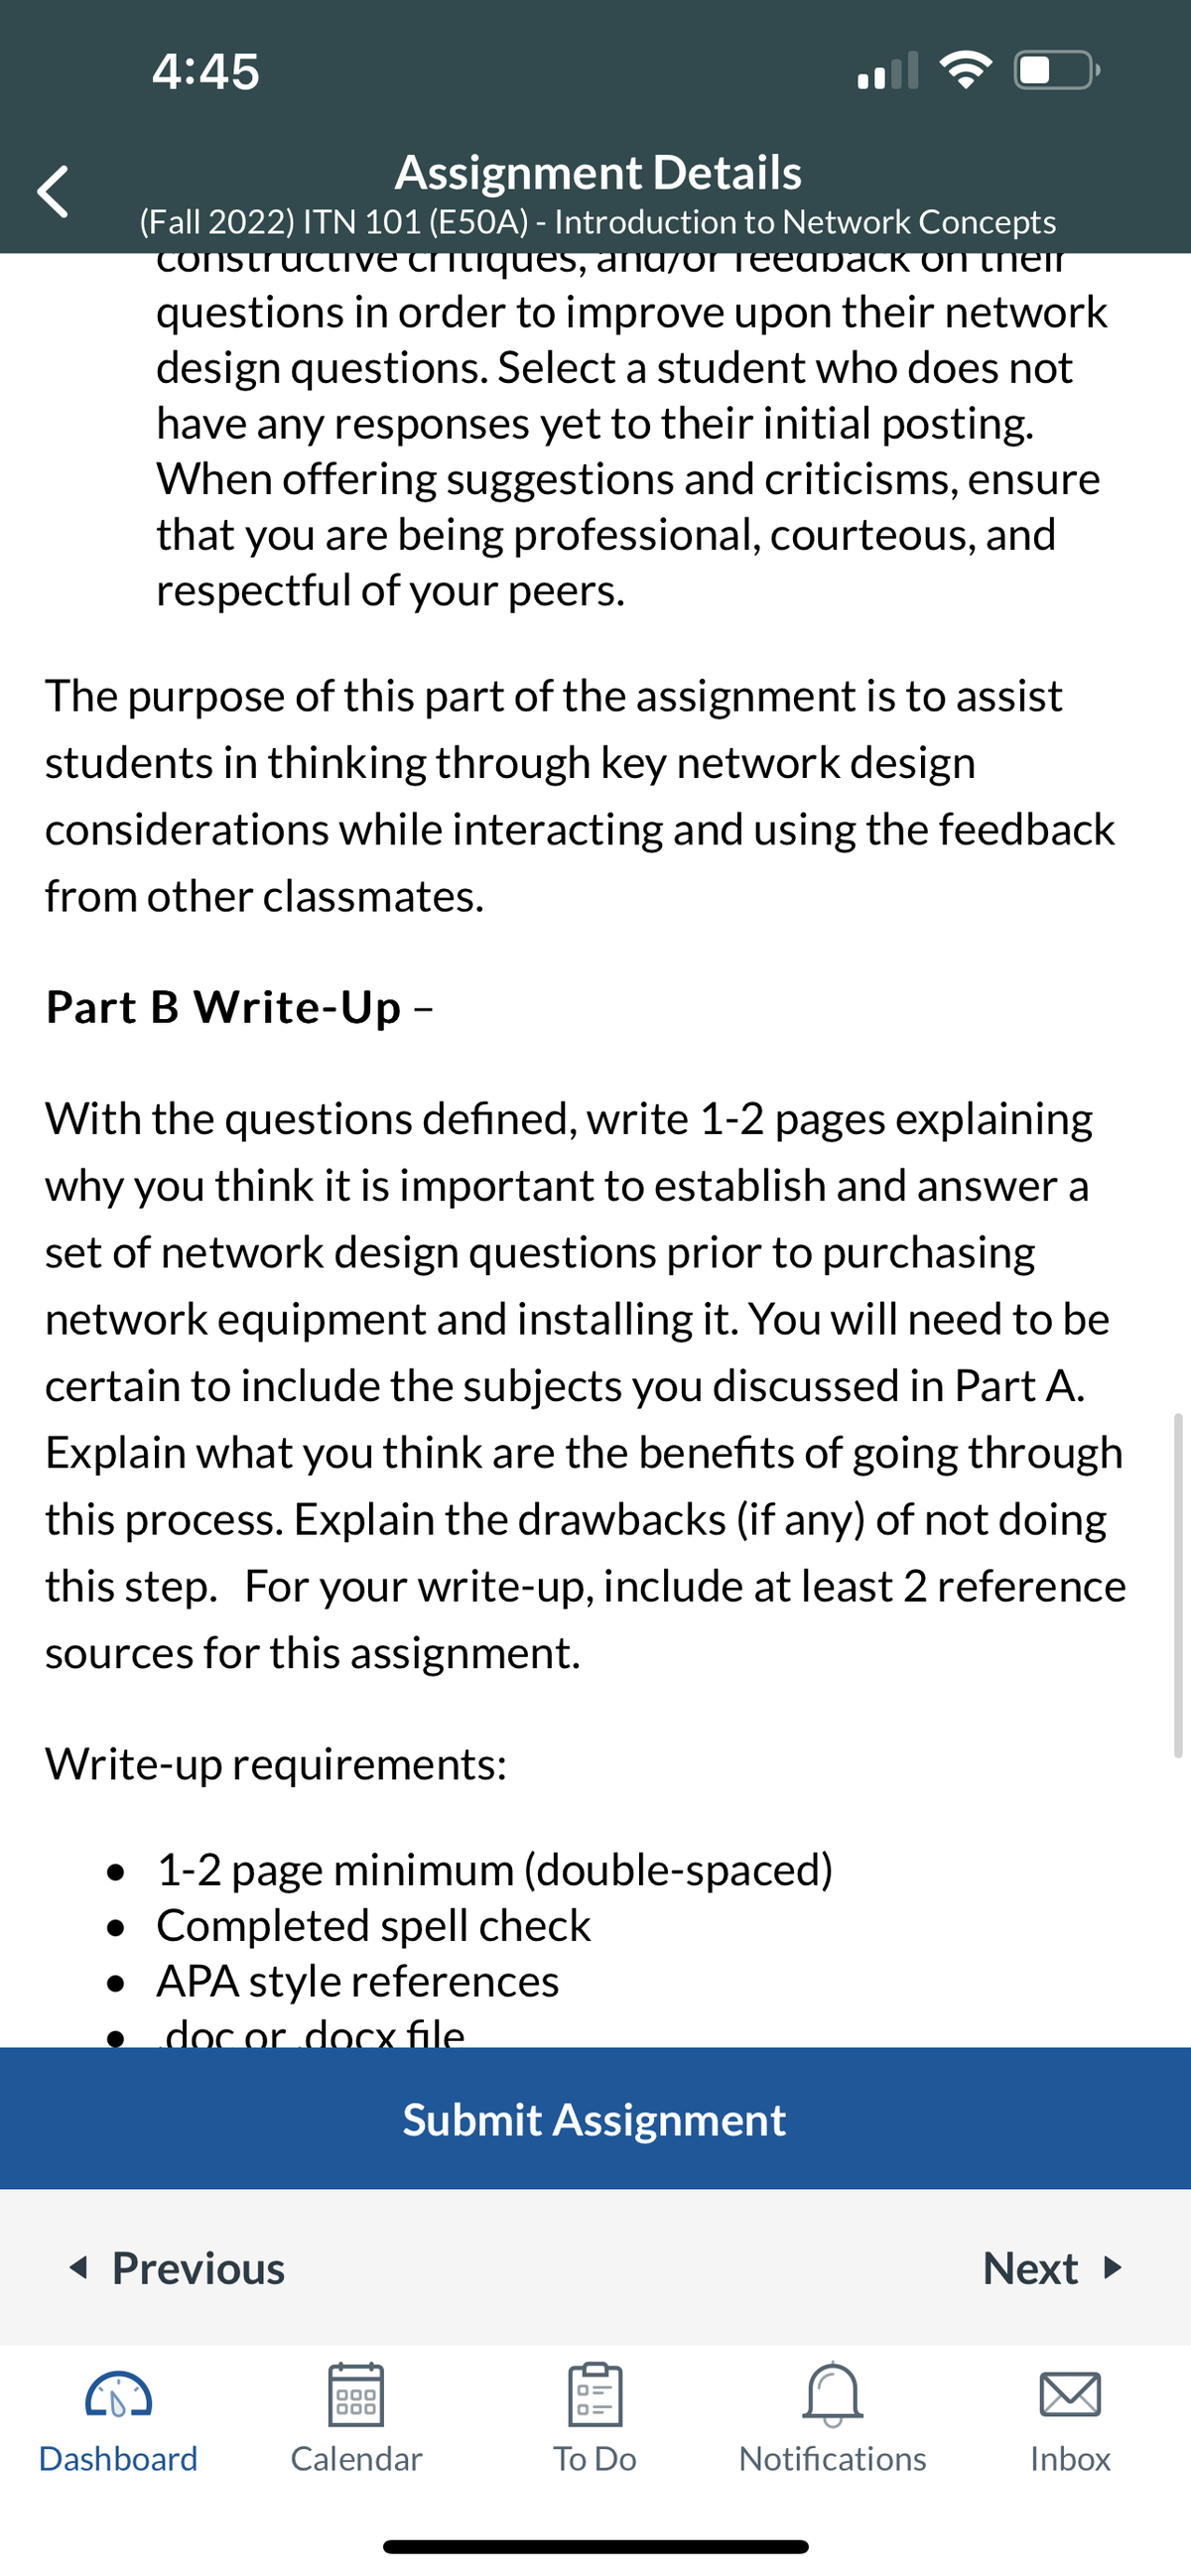 4:45
Assignment Details
(Fall 2022) ITN 101 (E50A) - Introduction to Network Concepts
constructive critiques, anuyor Teedback on their
questions in order to improve upon their network
design questions. Select a student who does not
have any responses yet to their initial posting.
When offering suggestions and criticisms, ensure
that you are being professional, courteous, and
respectful of your peers.
The purpose of this part of the assignment is to assist
students in thinking through key network design
considerations while interacting and using the feedback
from other classmates.
Part B Write-Up -
With the questions defined, write 1-2 pages explaining
why you think it is important to establish and answer a
set of network design questions prior to purchasing
network equipment and installing it. You will need to be
certain to include the subjects you discussed in Part A.
Explain what you think are the benefits of going through
this process. Explain the drawbacks (if any) of not doing
this step. For your write-up, include at least 2 reference
sources for this assignment.
Write-up requirements:
• 1-2 page minimum (double-spaced)
●
Completed spell check
• APA style references
doc or docx file
◄ Previous
Dashboard
Submit Assignment
000
000
Calendar
To Do
Notifications
Next ►
Inbox